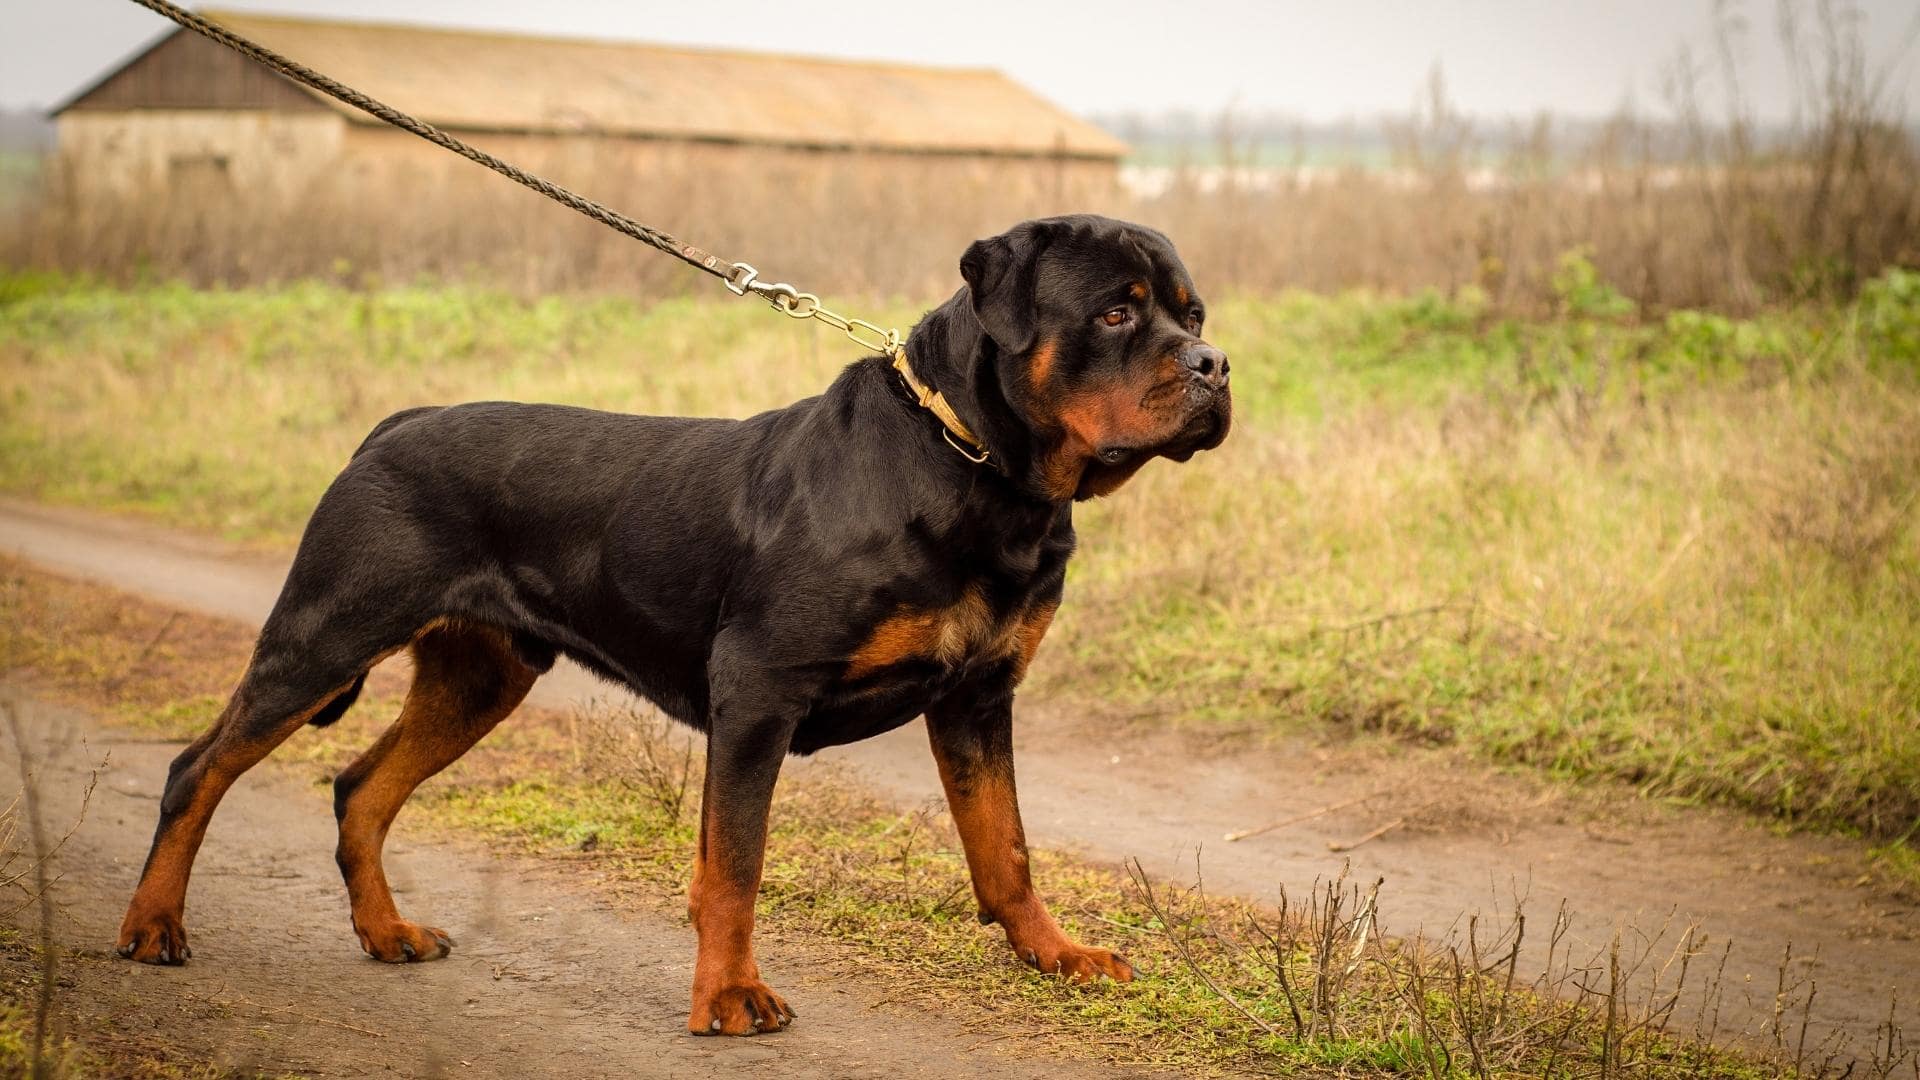 Why Does My Rottweiler Growl At Me? (7 Reasons + Tips)